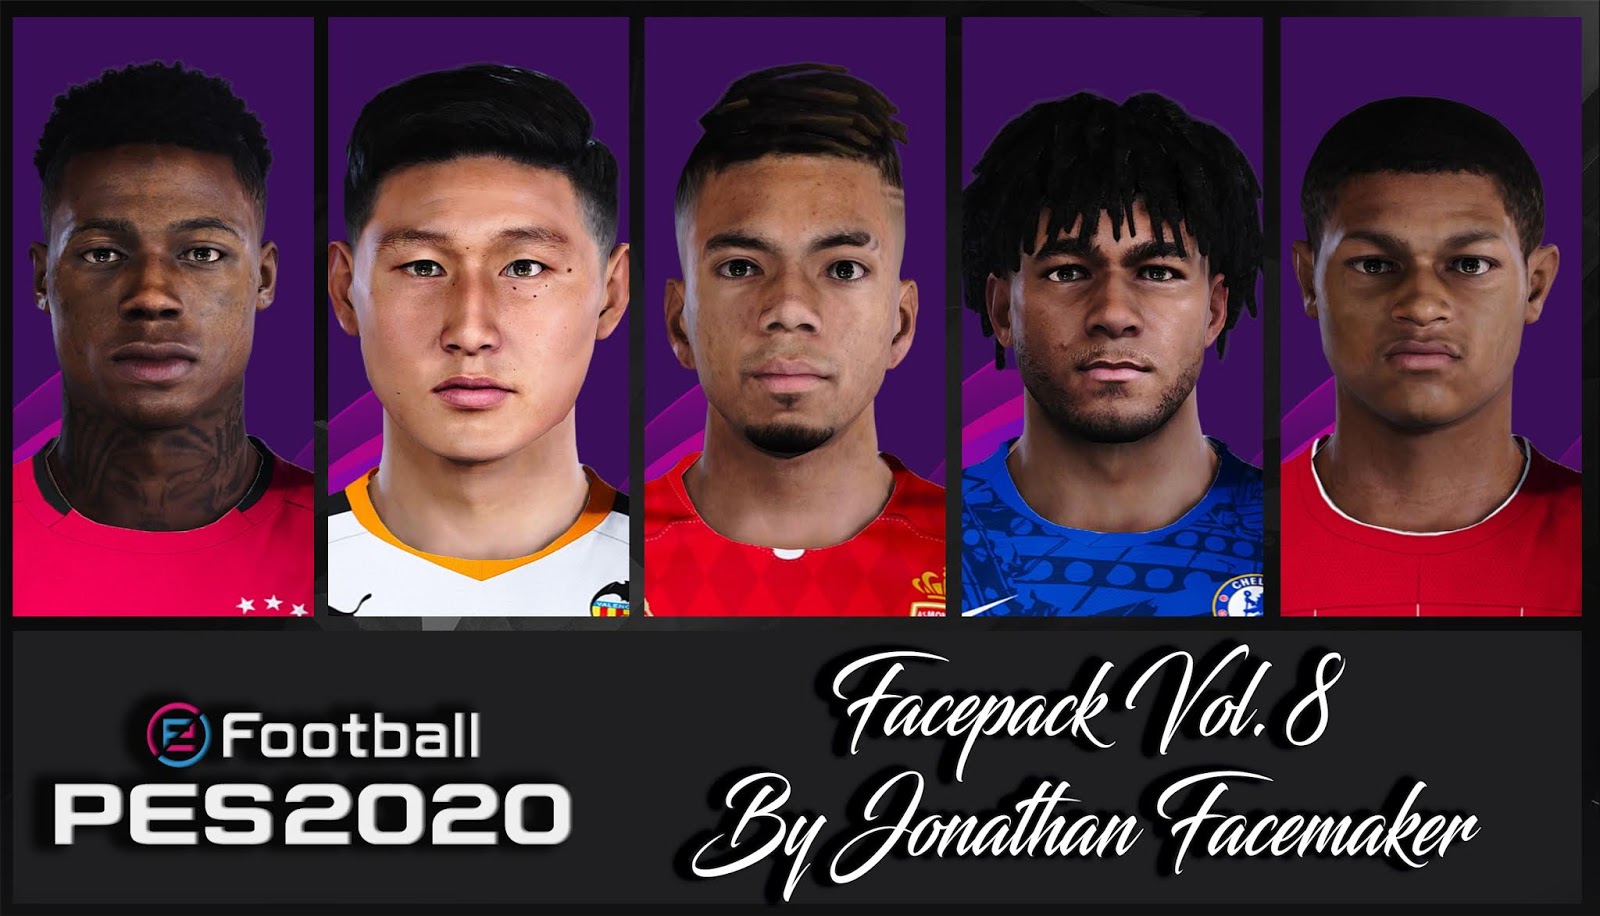 PES 2020 Facepack Vol. 8 by Jonathan Facemaker